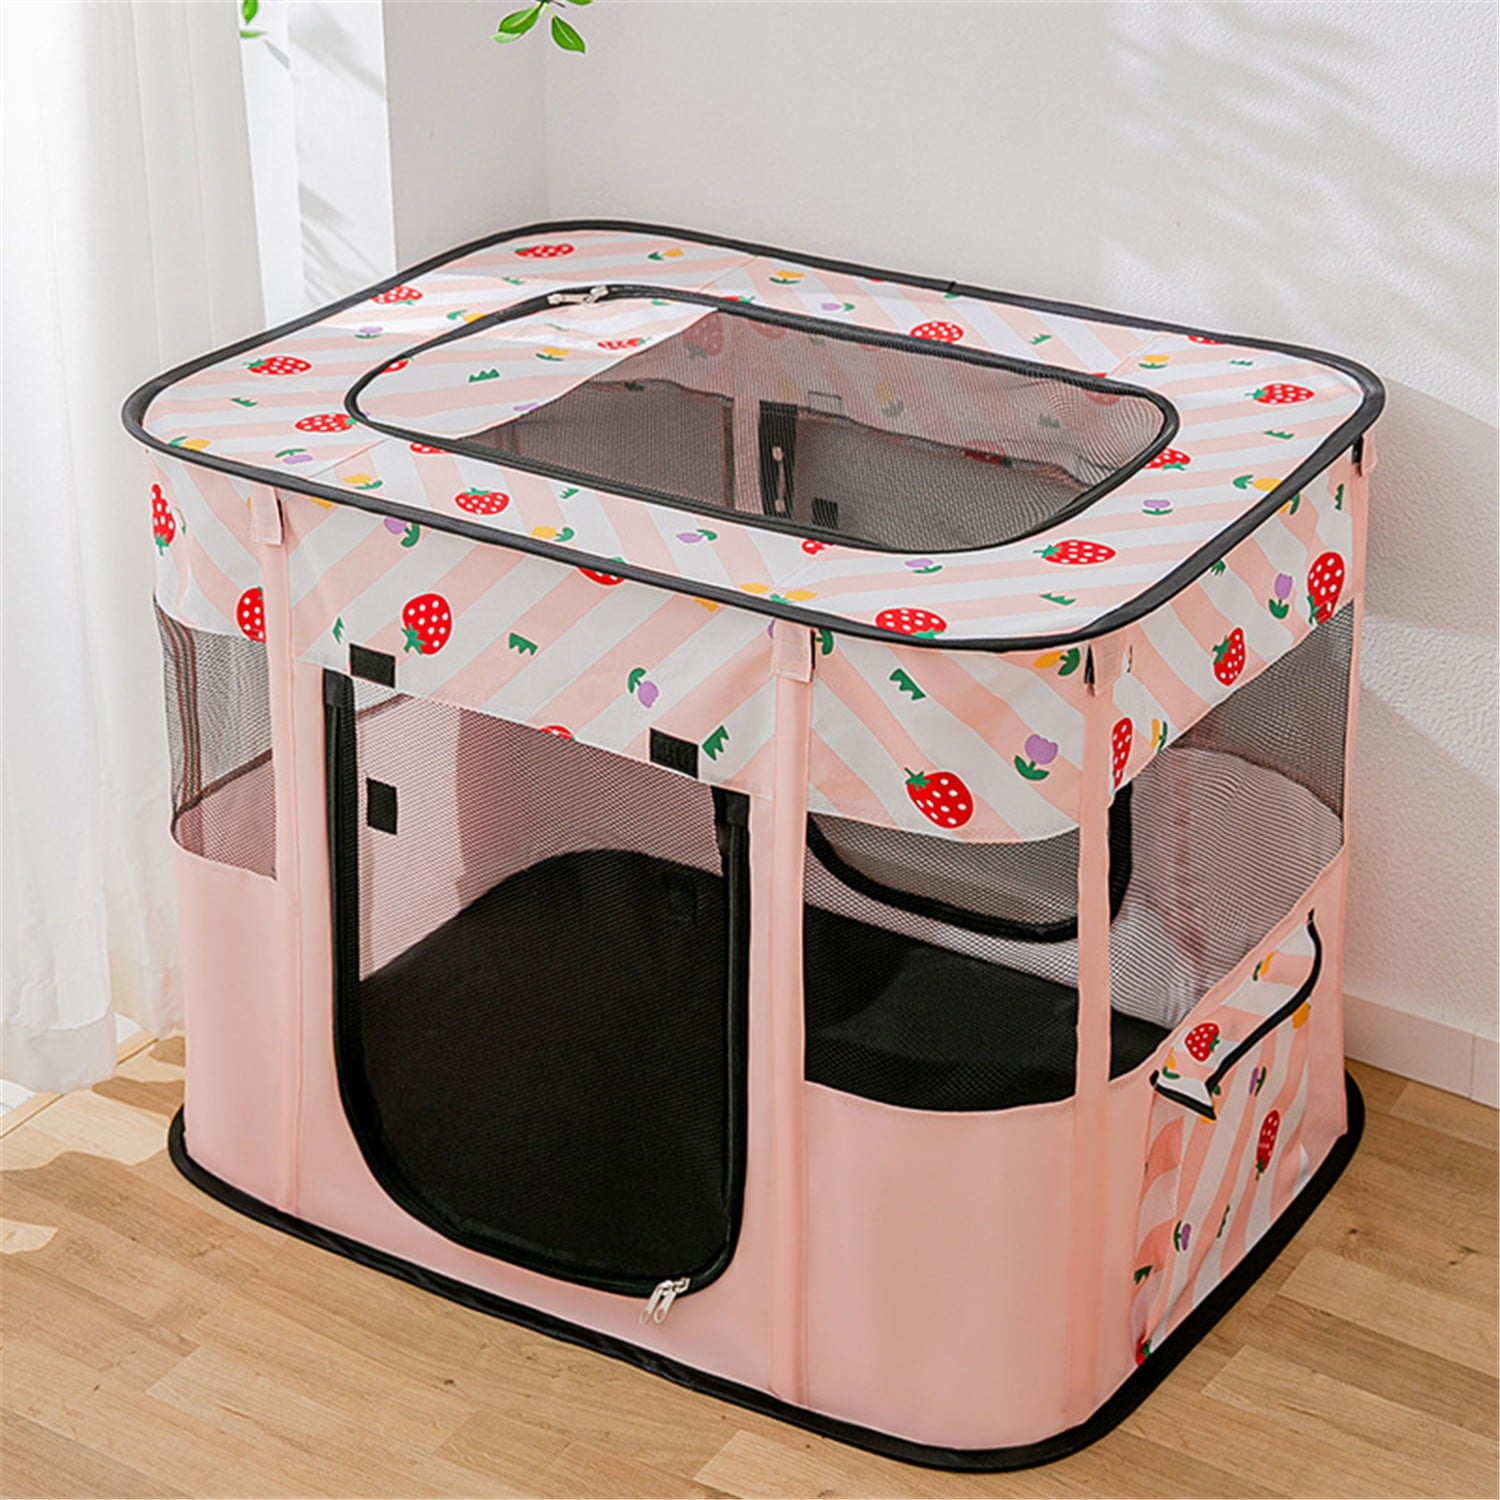 Portable Pet Playpen Premium Large Size Puppy Kennel - Best for Small and Medium Size Dogs and Cats - Simple Folding Design for Easy Storage